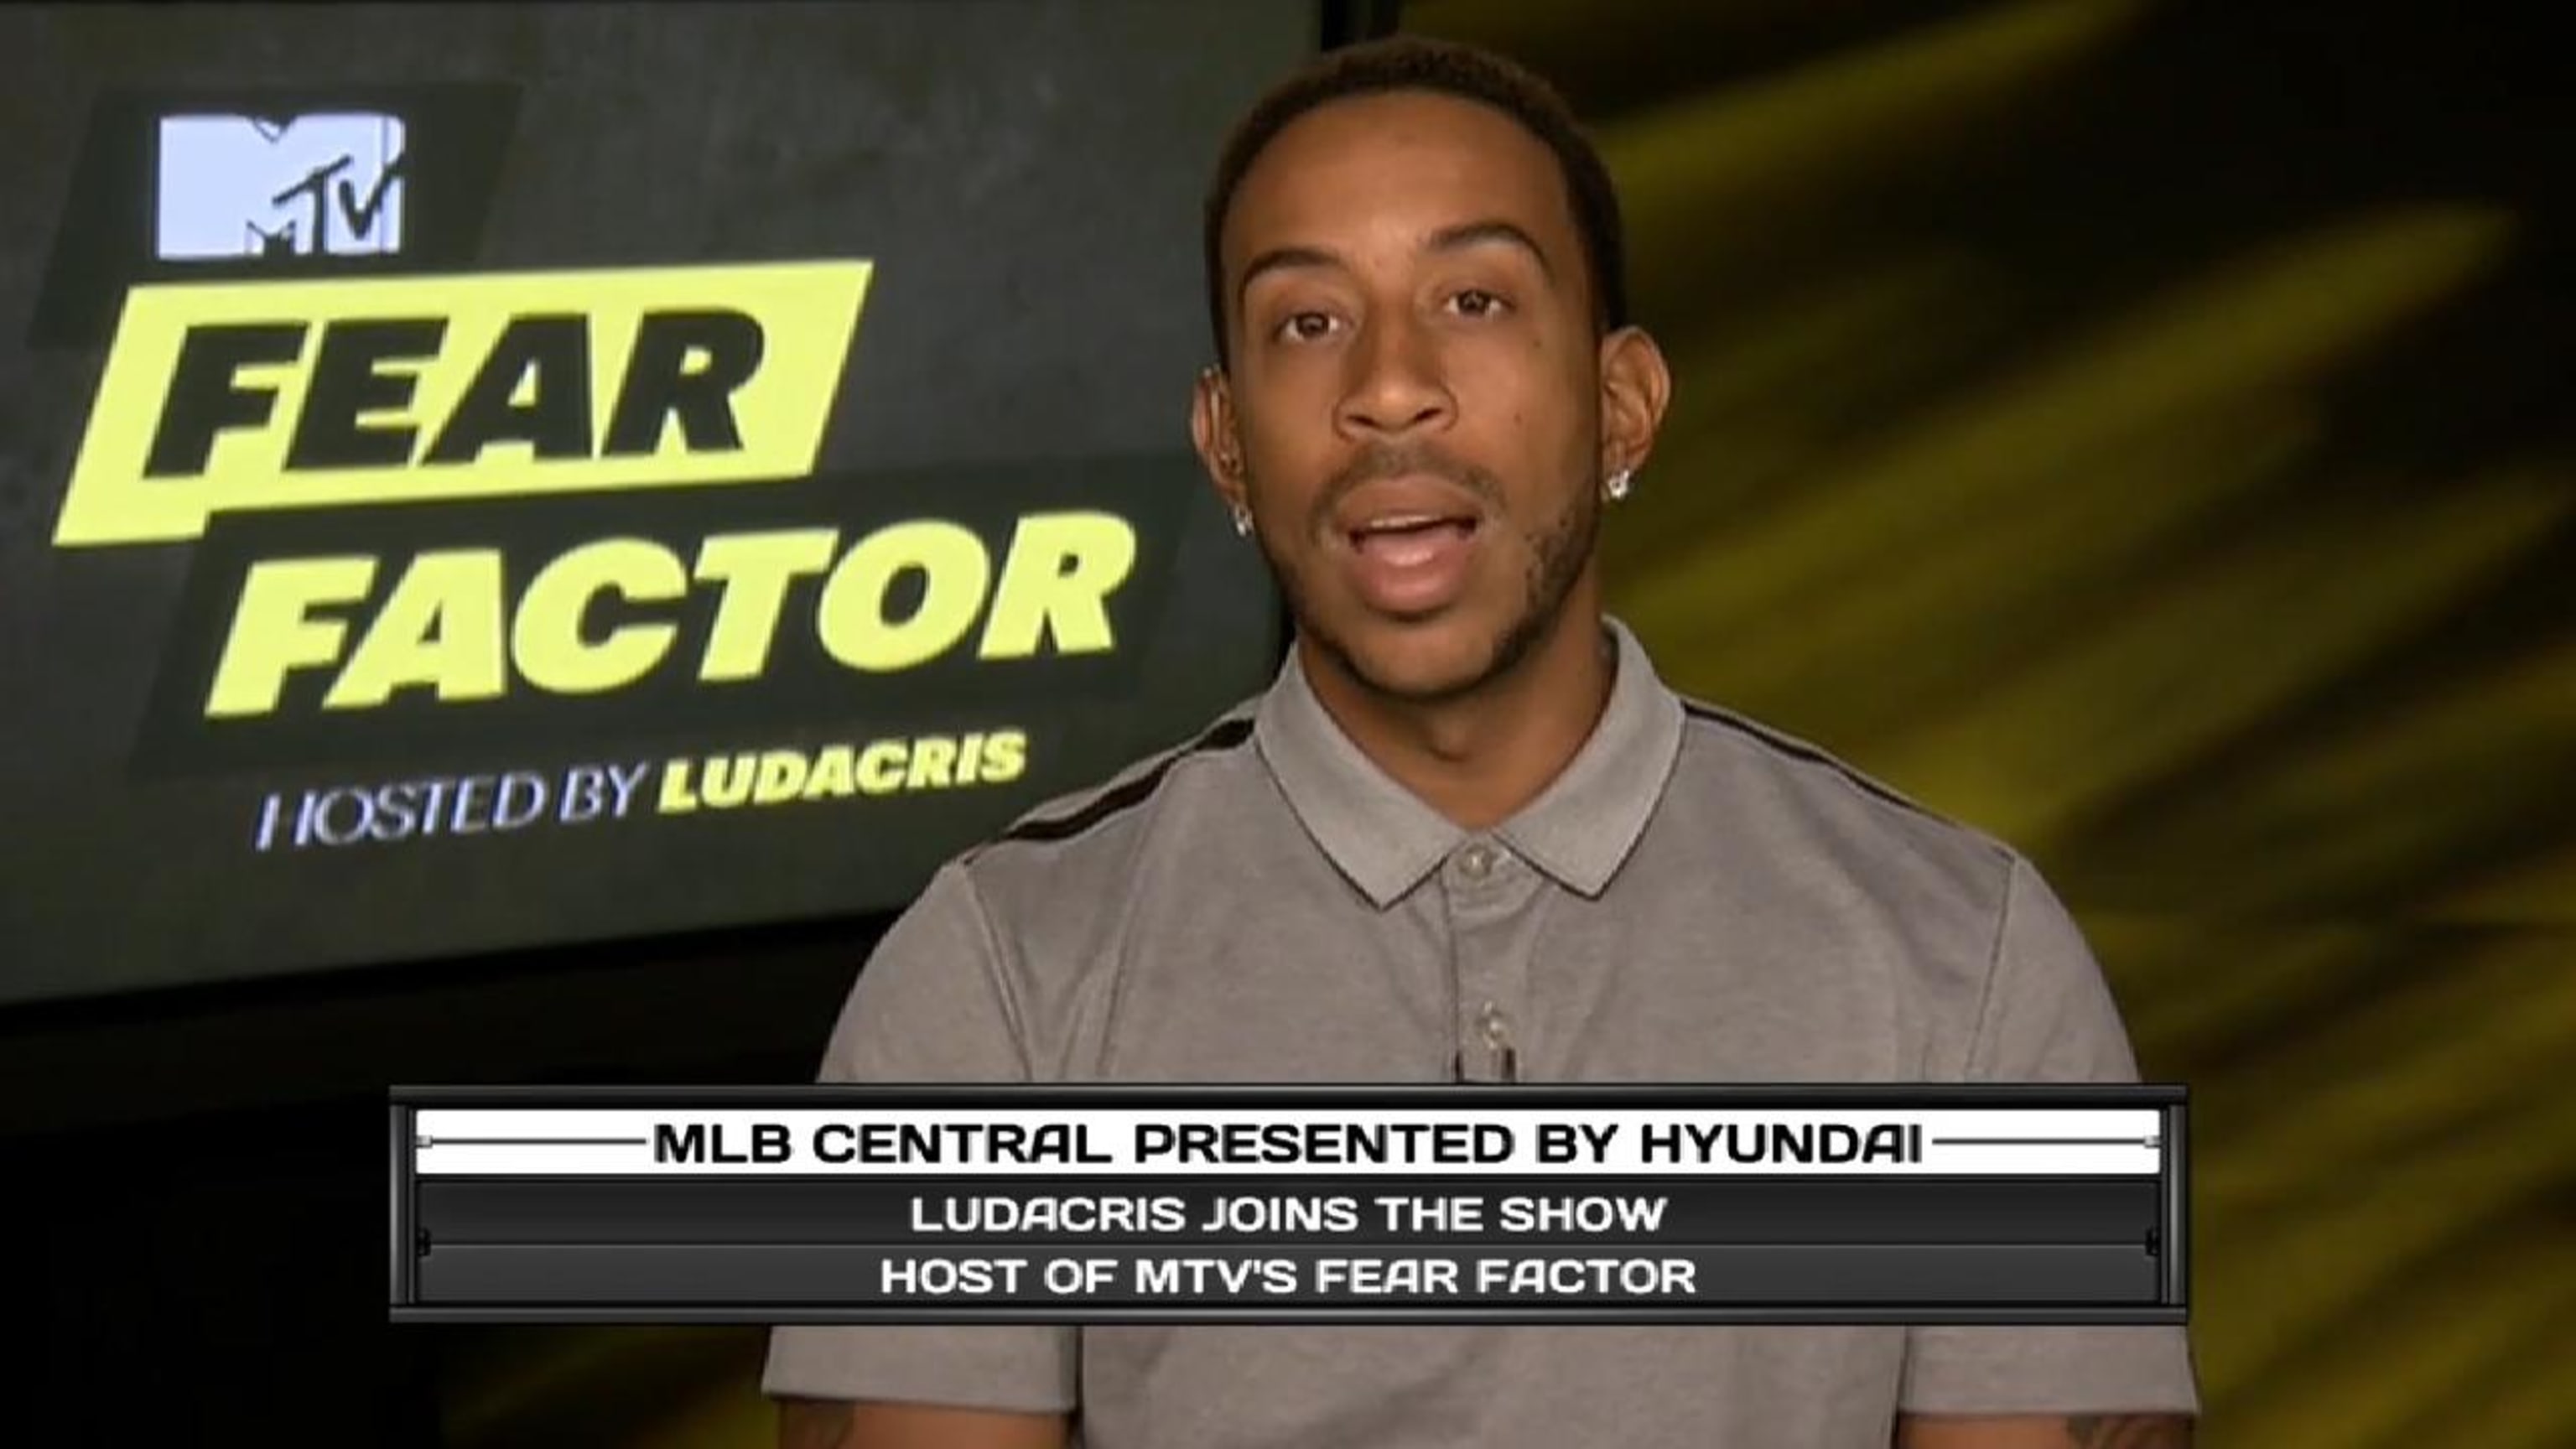 Let's watch Ludacris inspire the Braves offense by leading the Tomahawk Chop